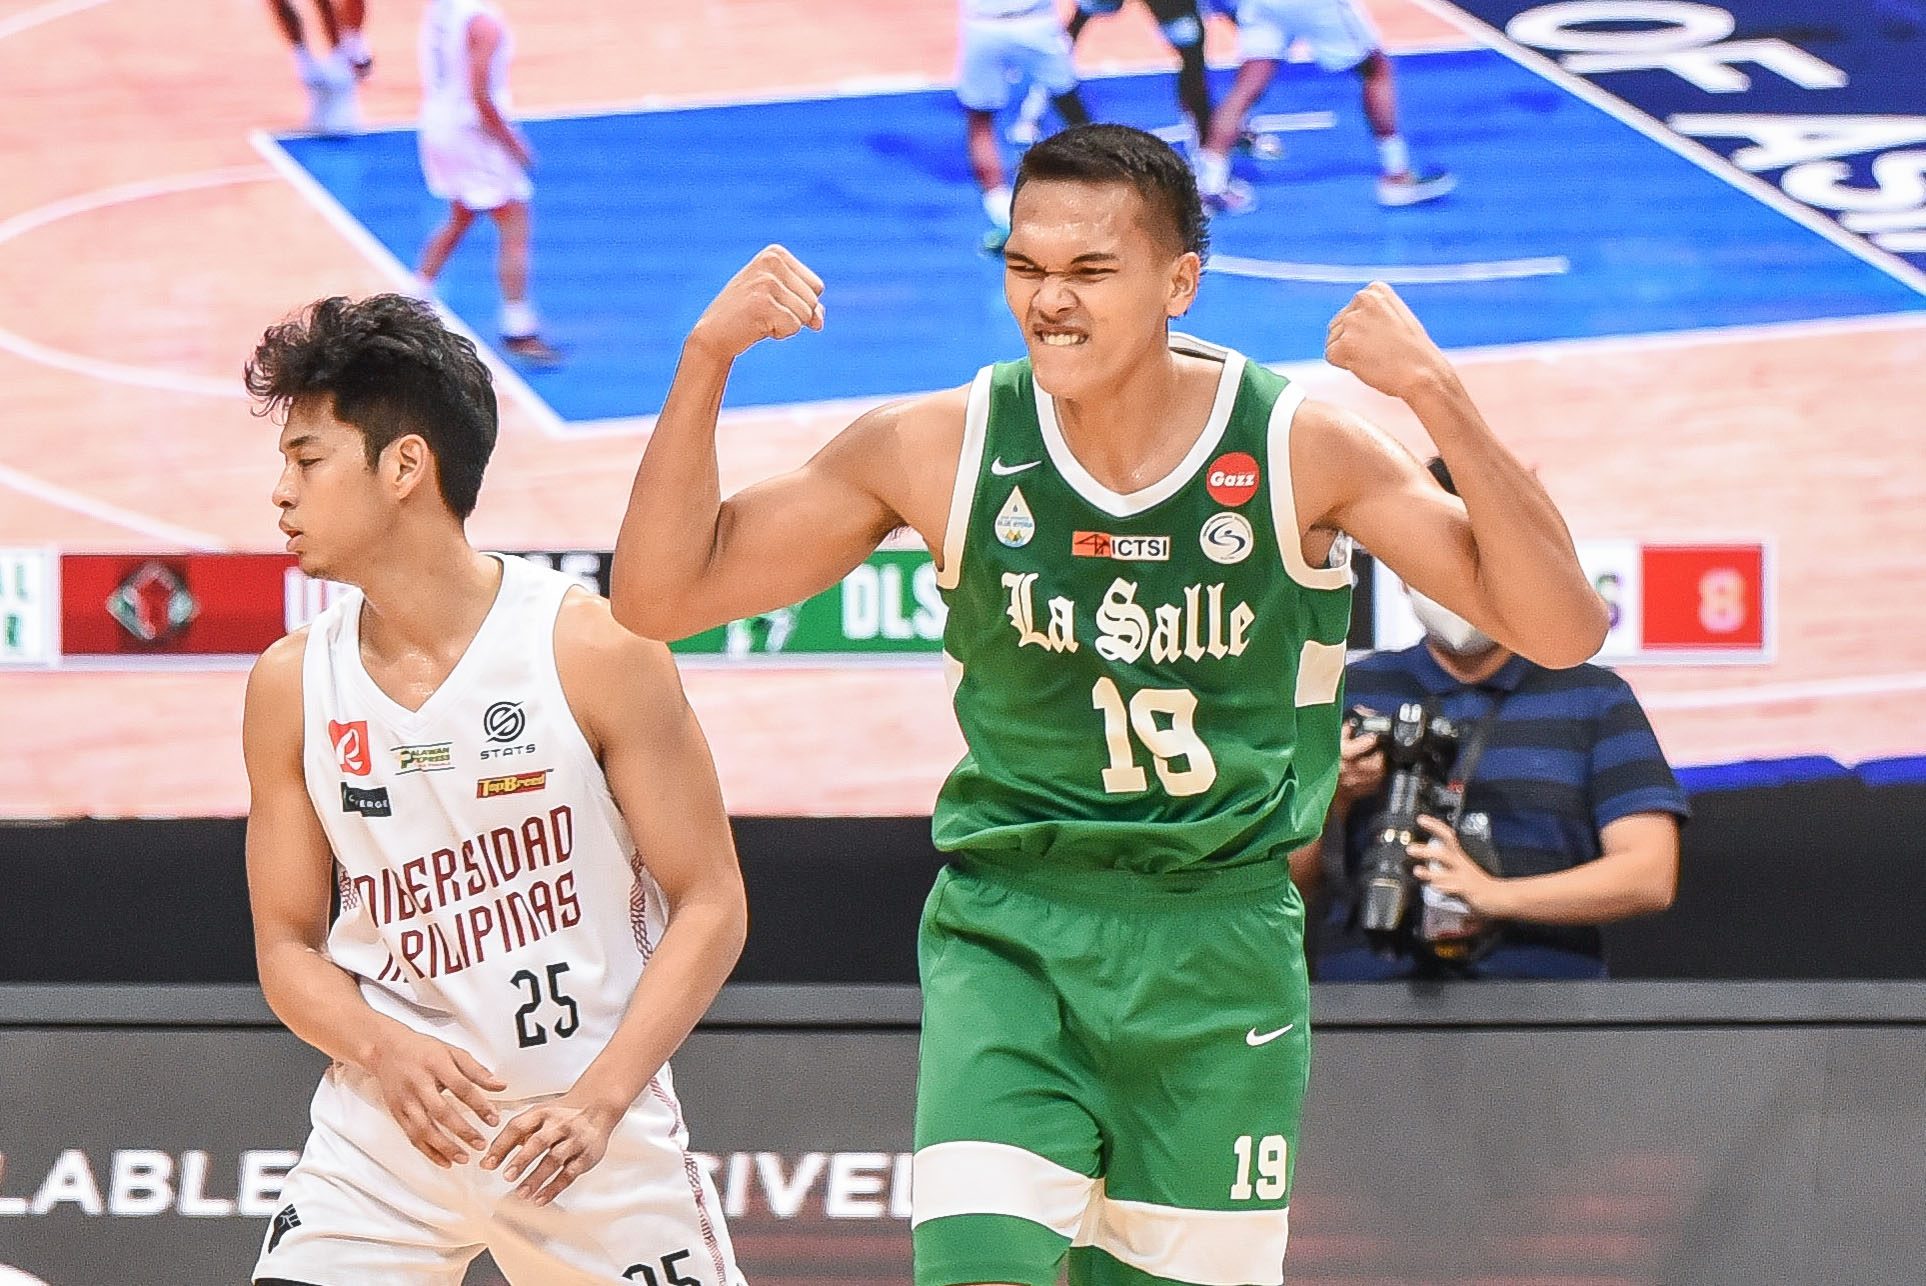 Sweet-shooting La Salle denies late UP comeback, forces do-or-die for UAAP finals berth